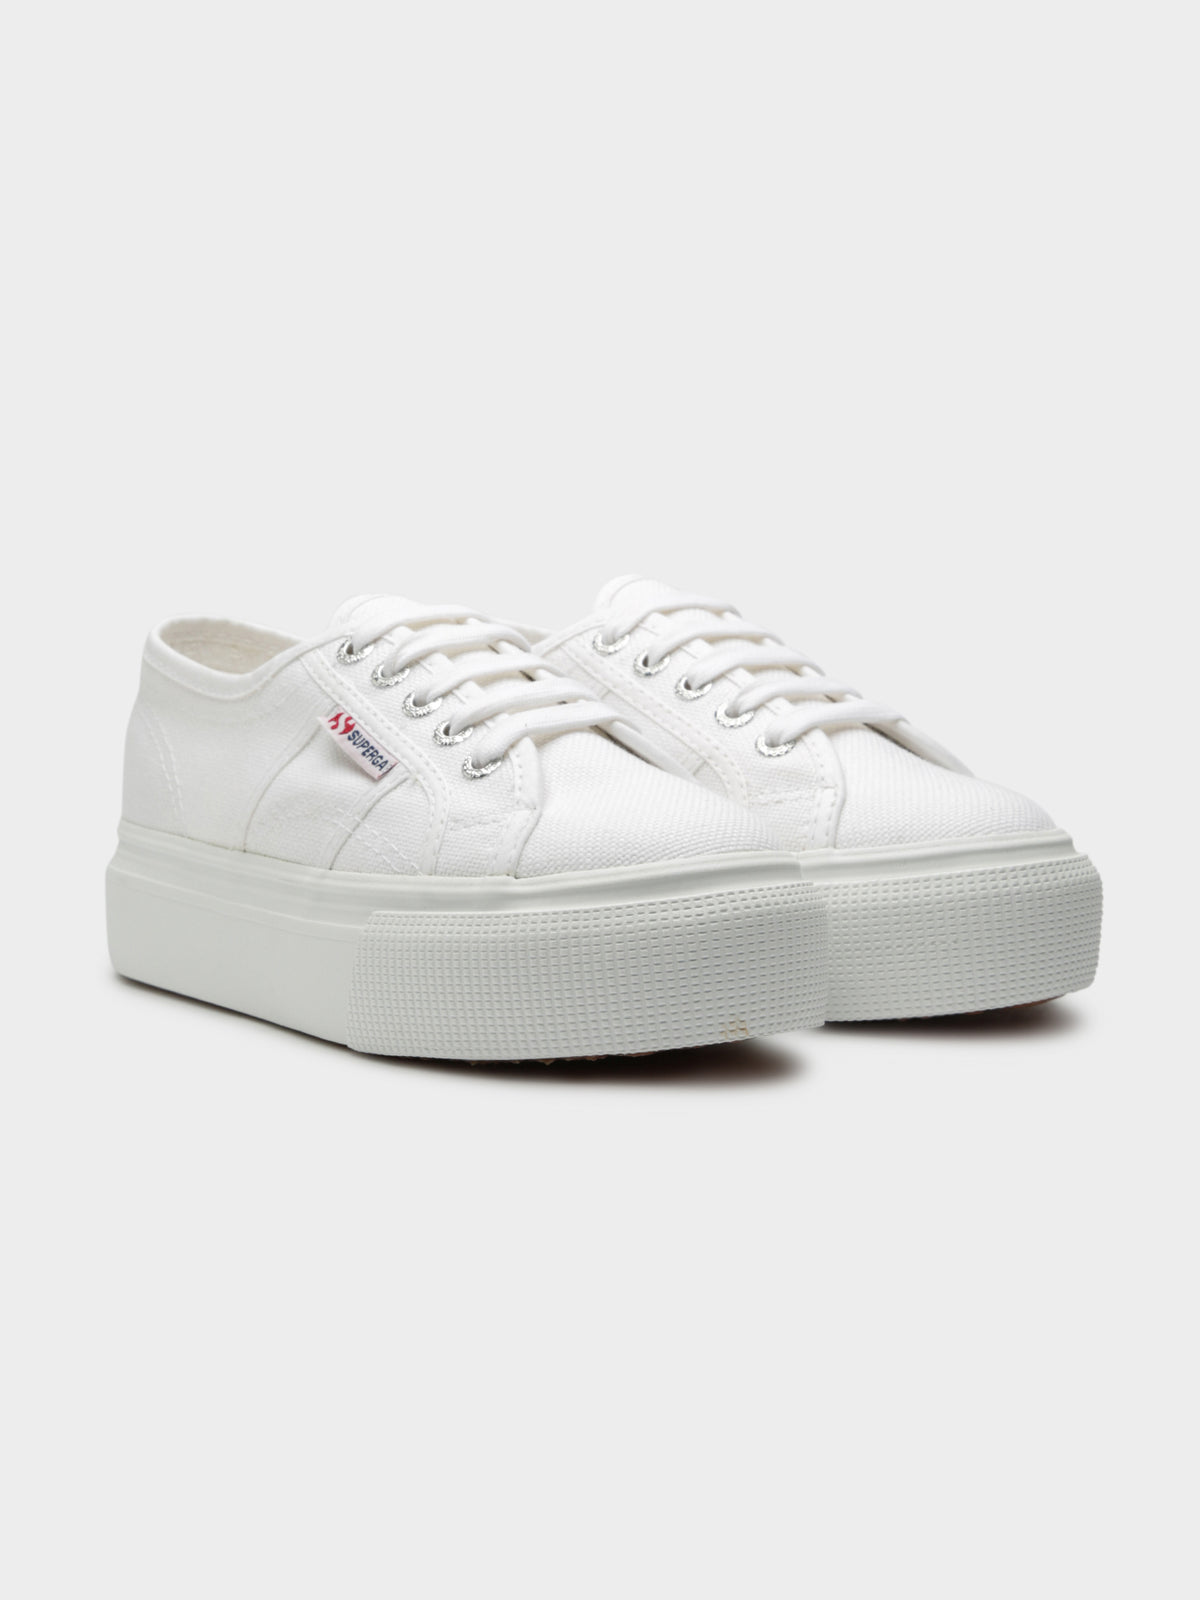 Womens 2790A Linea Up and Down Platform Sneakers in White Canvas